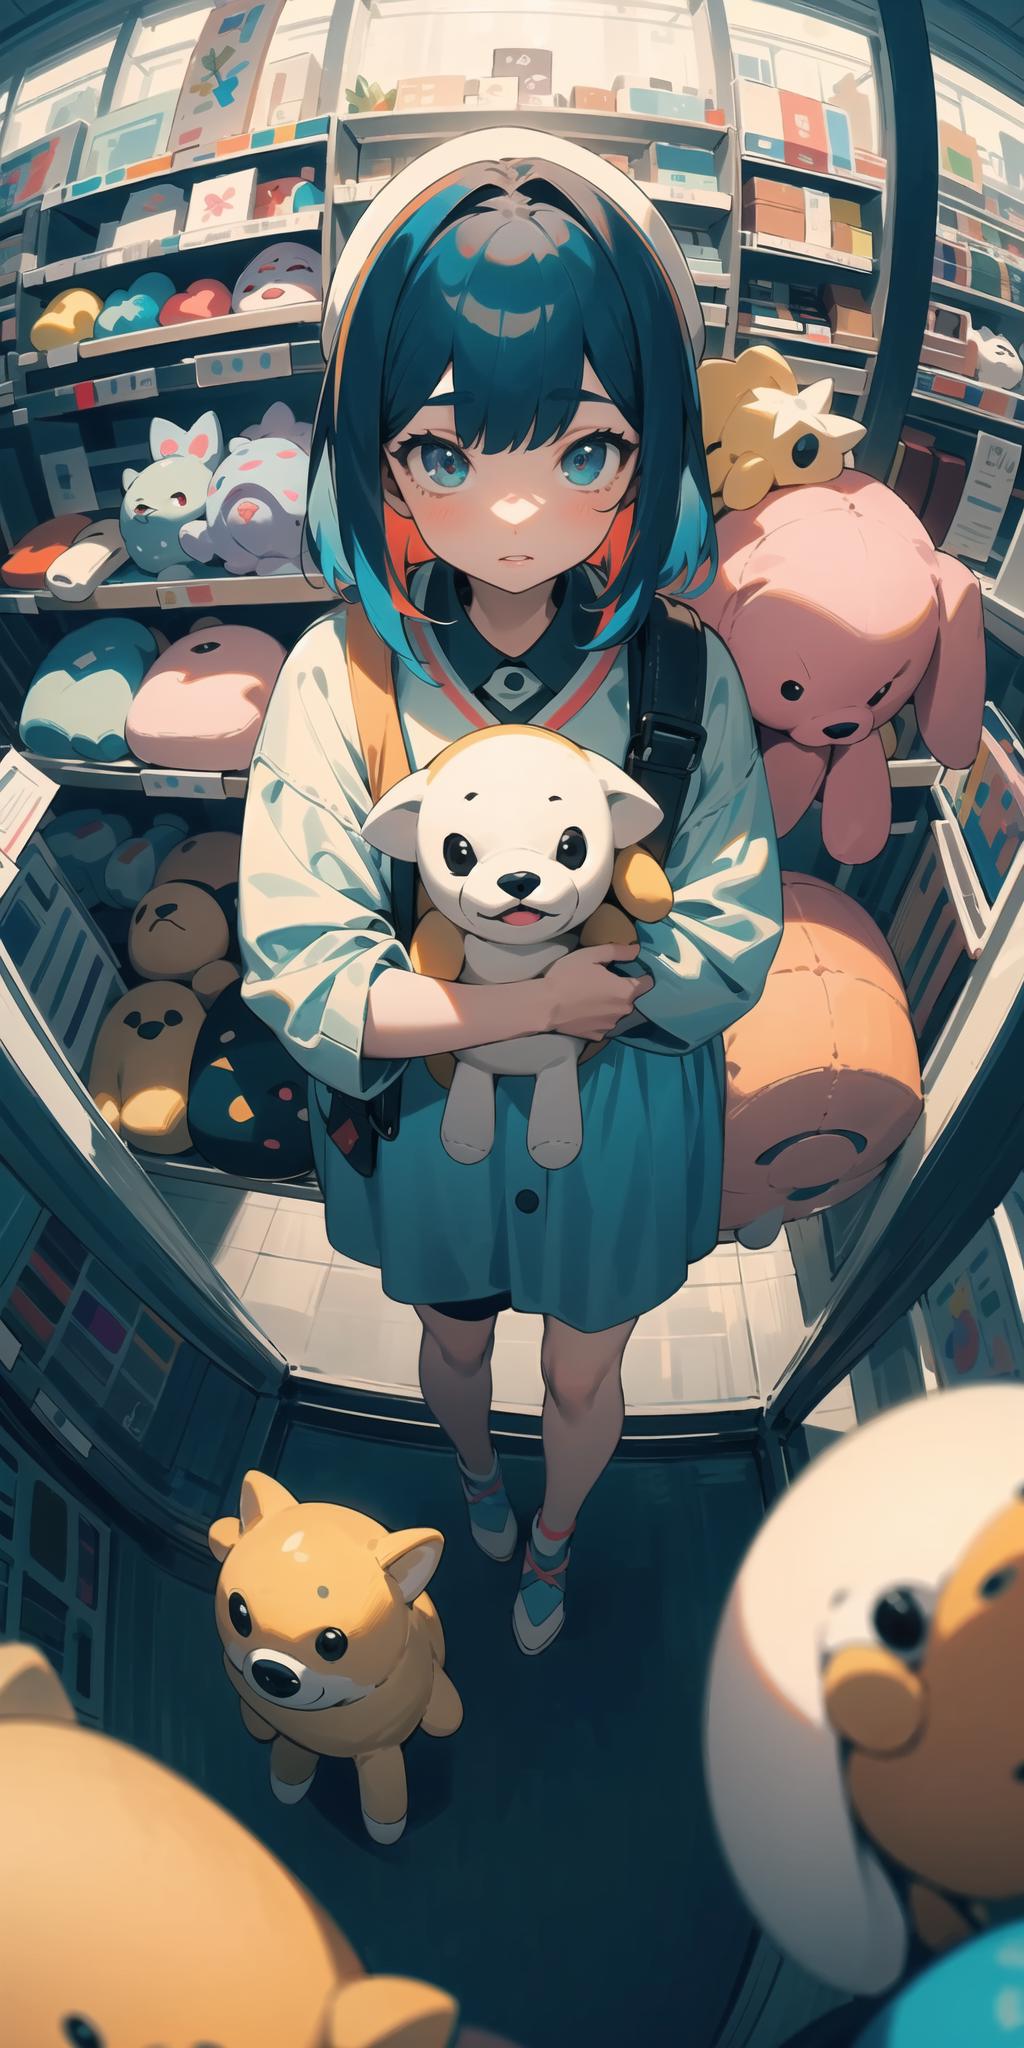 A girl holding a teddy bear in a stuffed animal store.